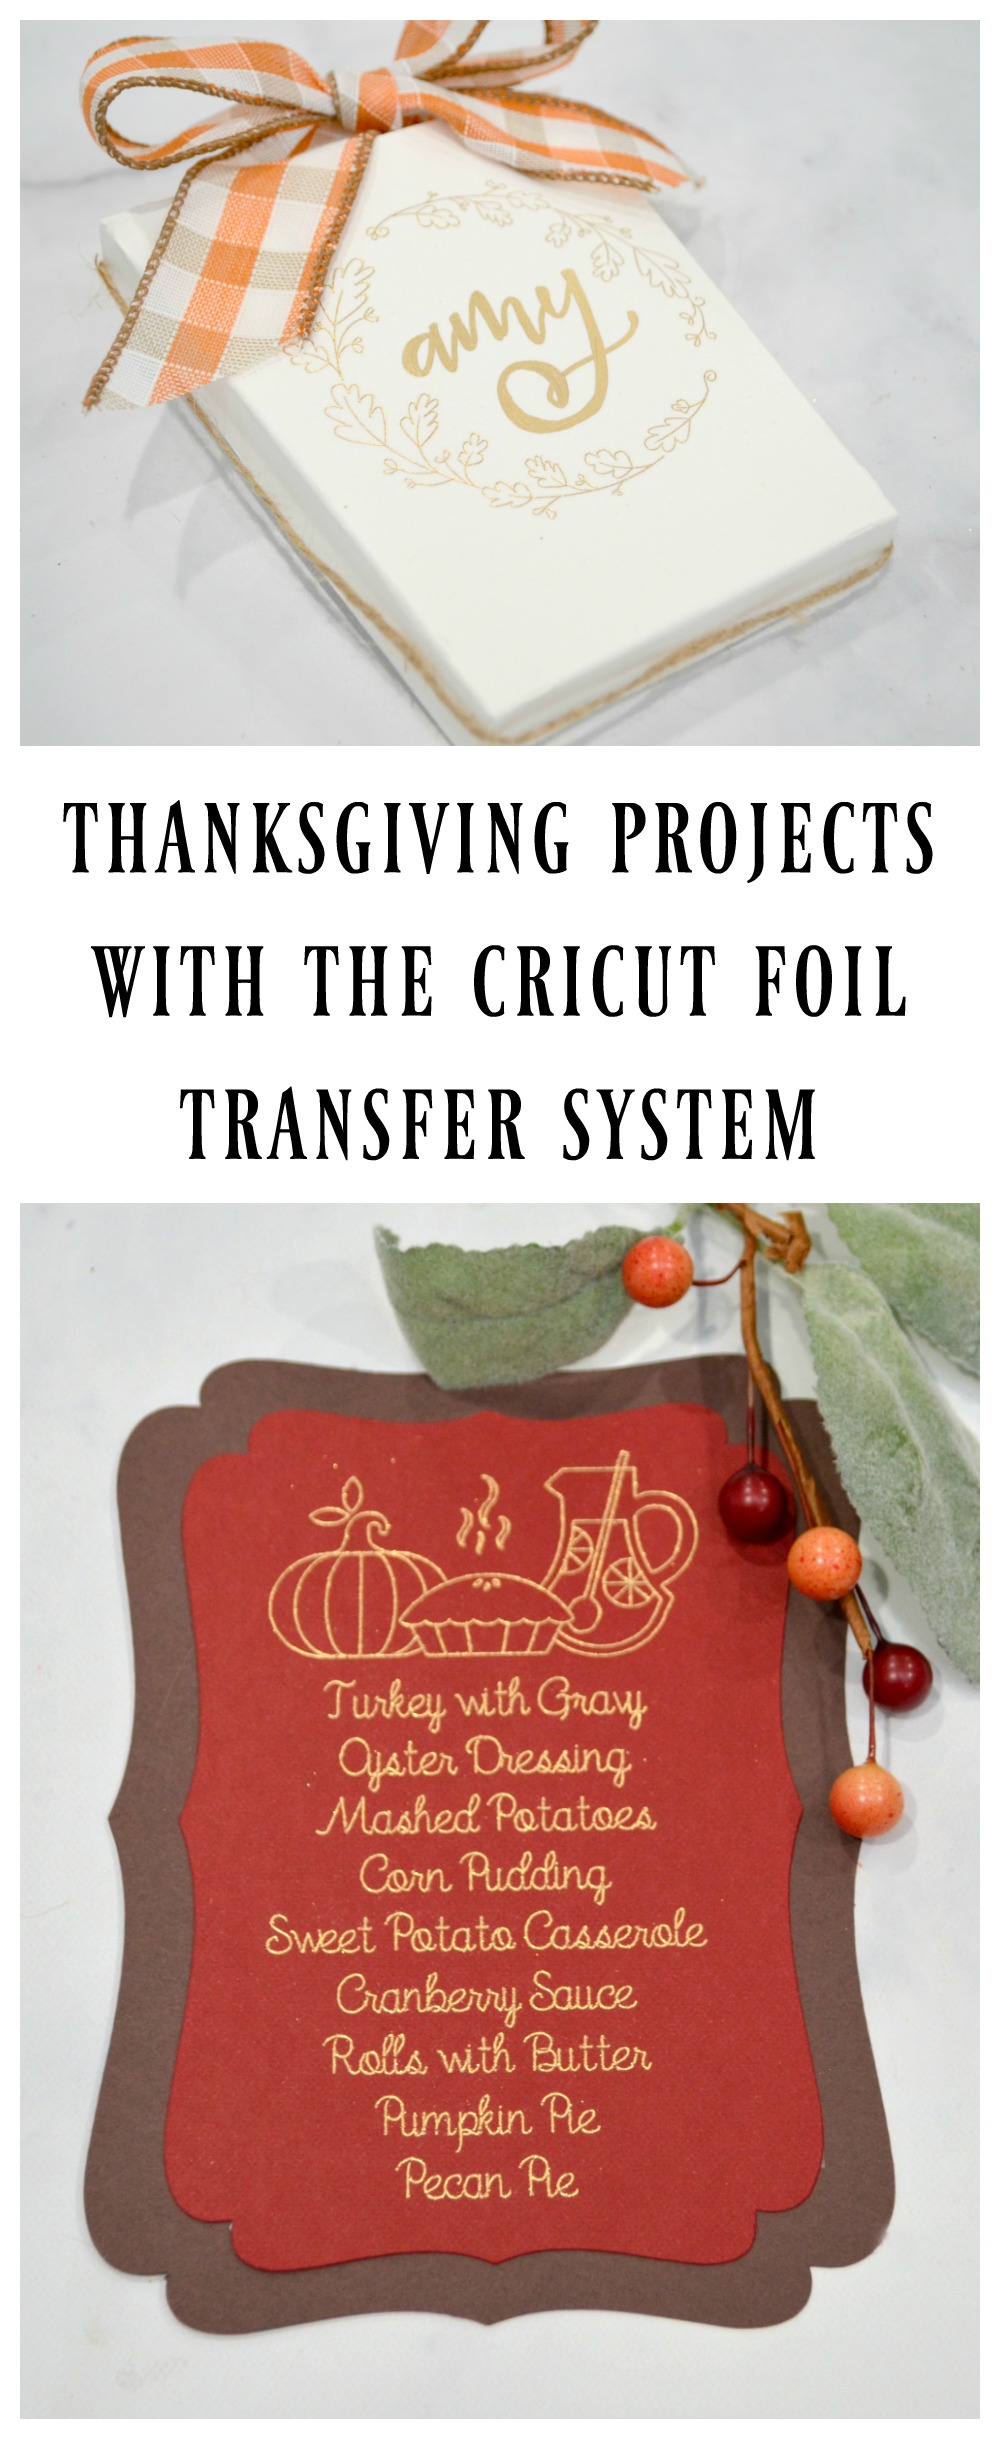 Thanksgiving Projects with the Cricut Foil Transfer System